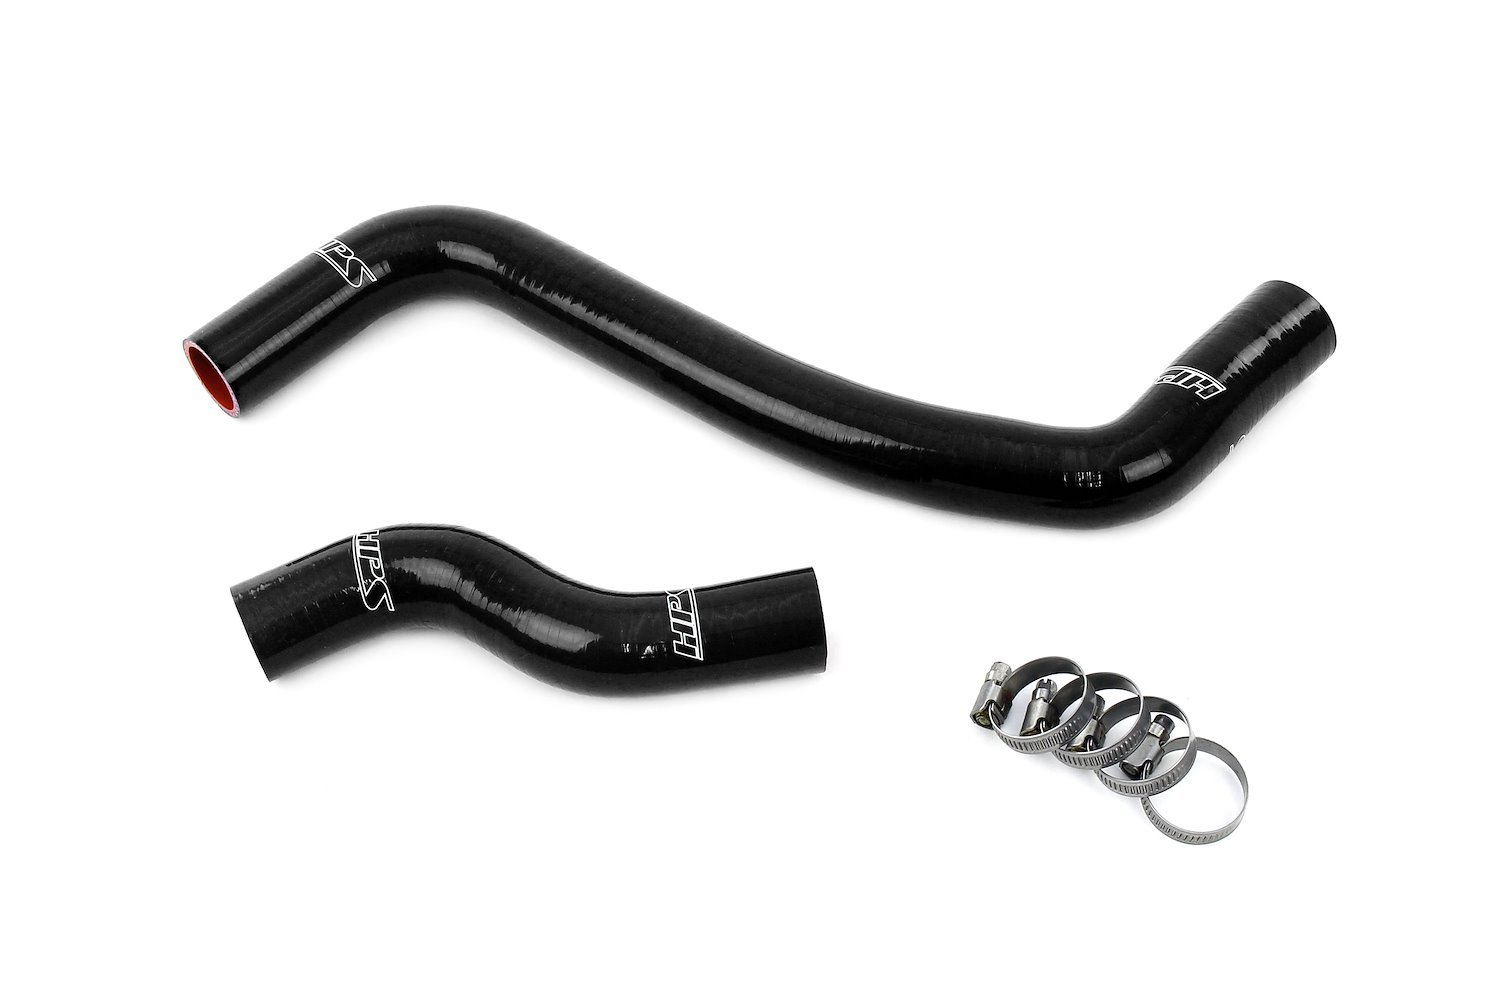 57-2124-BLK Radiator Hose Kit, 3-Ply Reinforced Silicone, Replaces Rubber Radiator Coolant Hoses